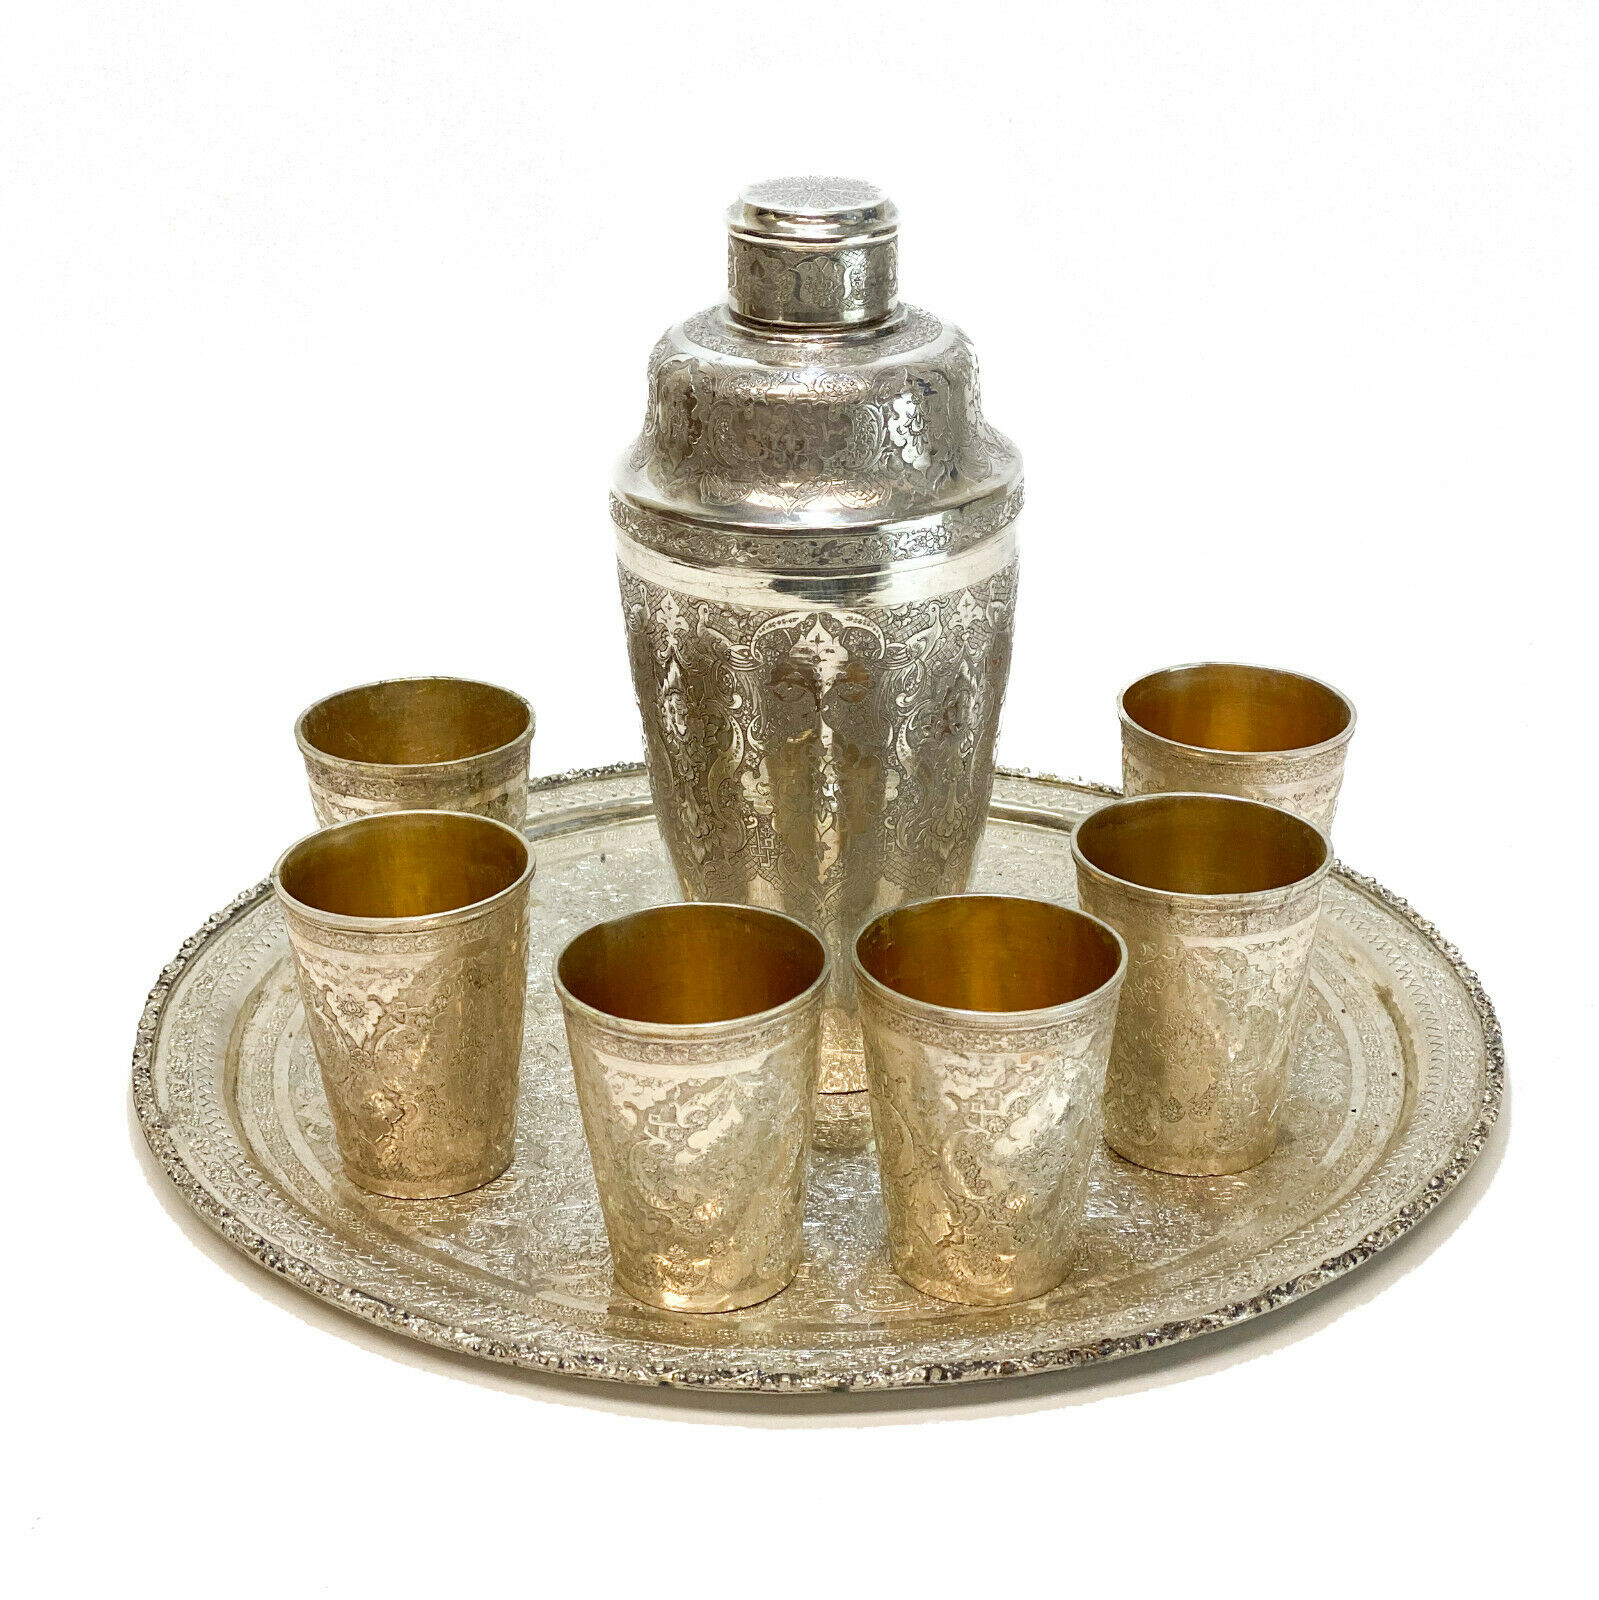 Middle Eastern 84 Silver Ornate Vodka Martini Set For 6, First Half 20th C